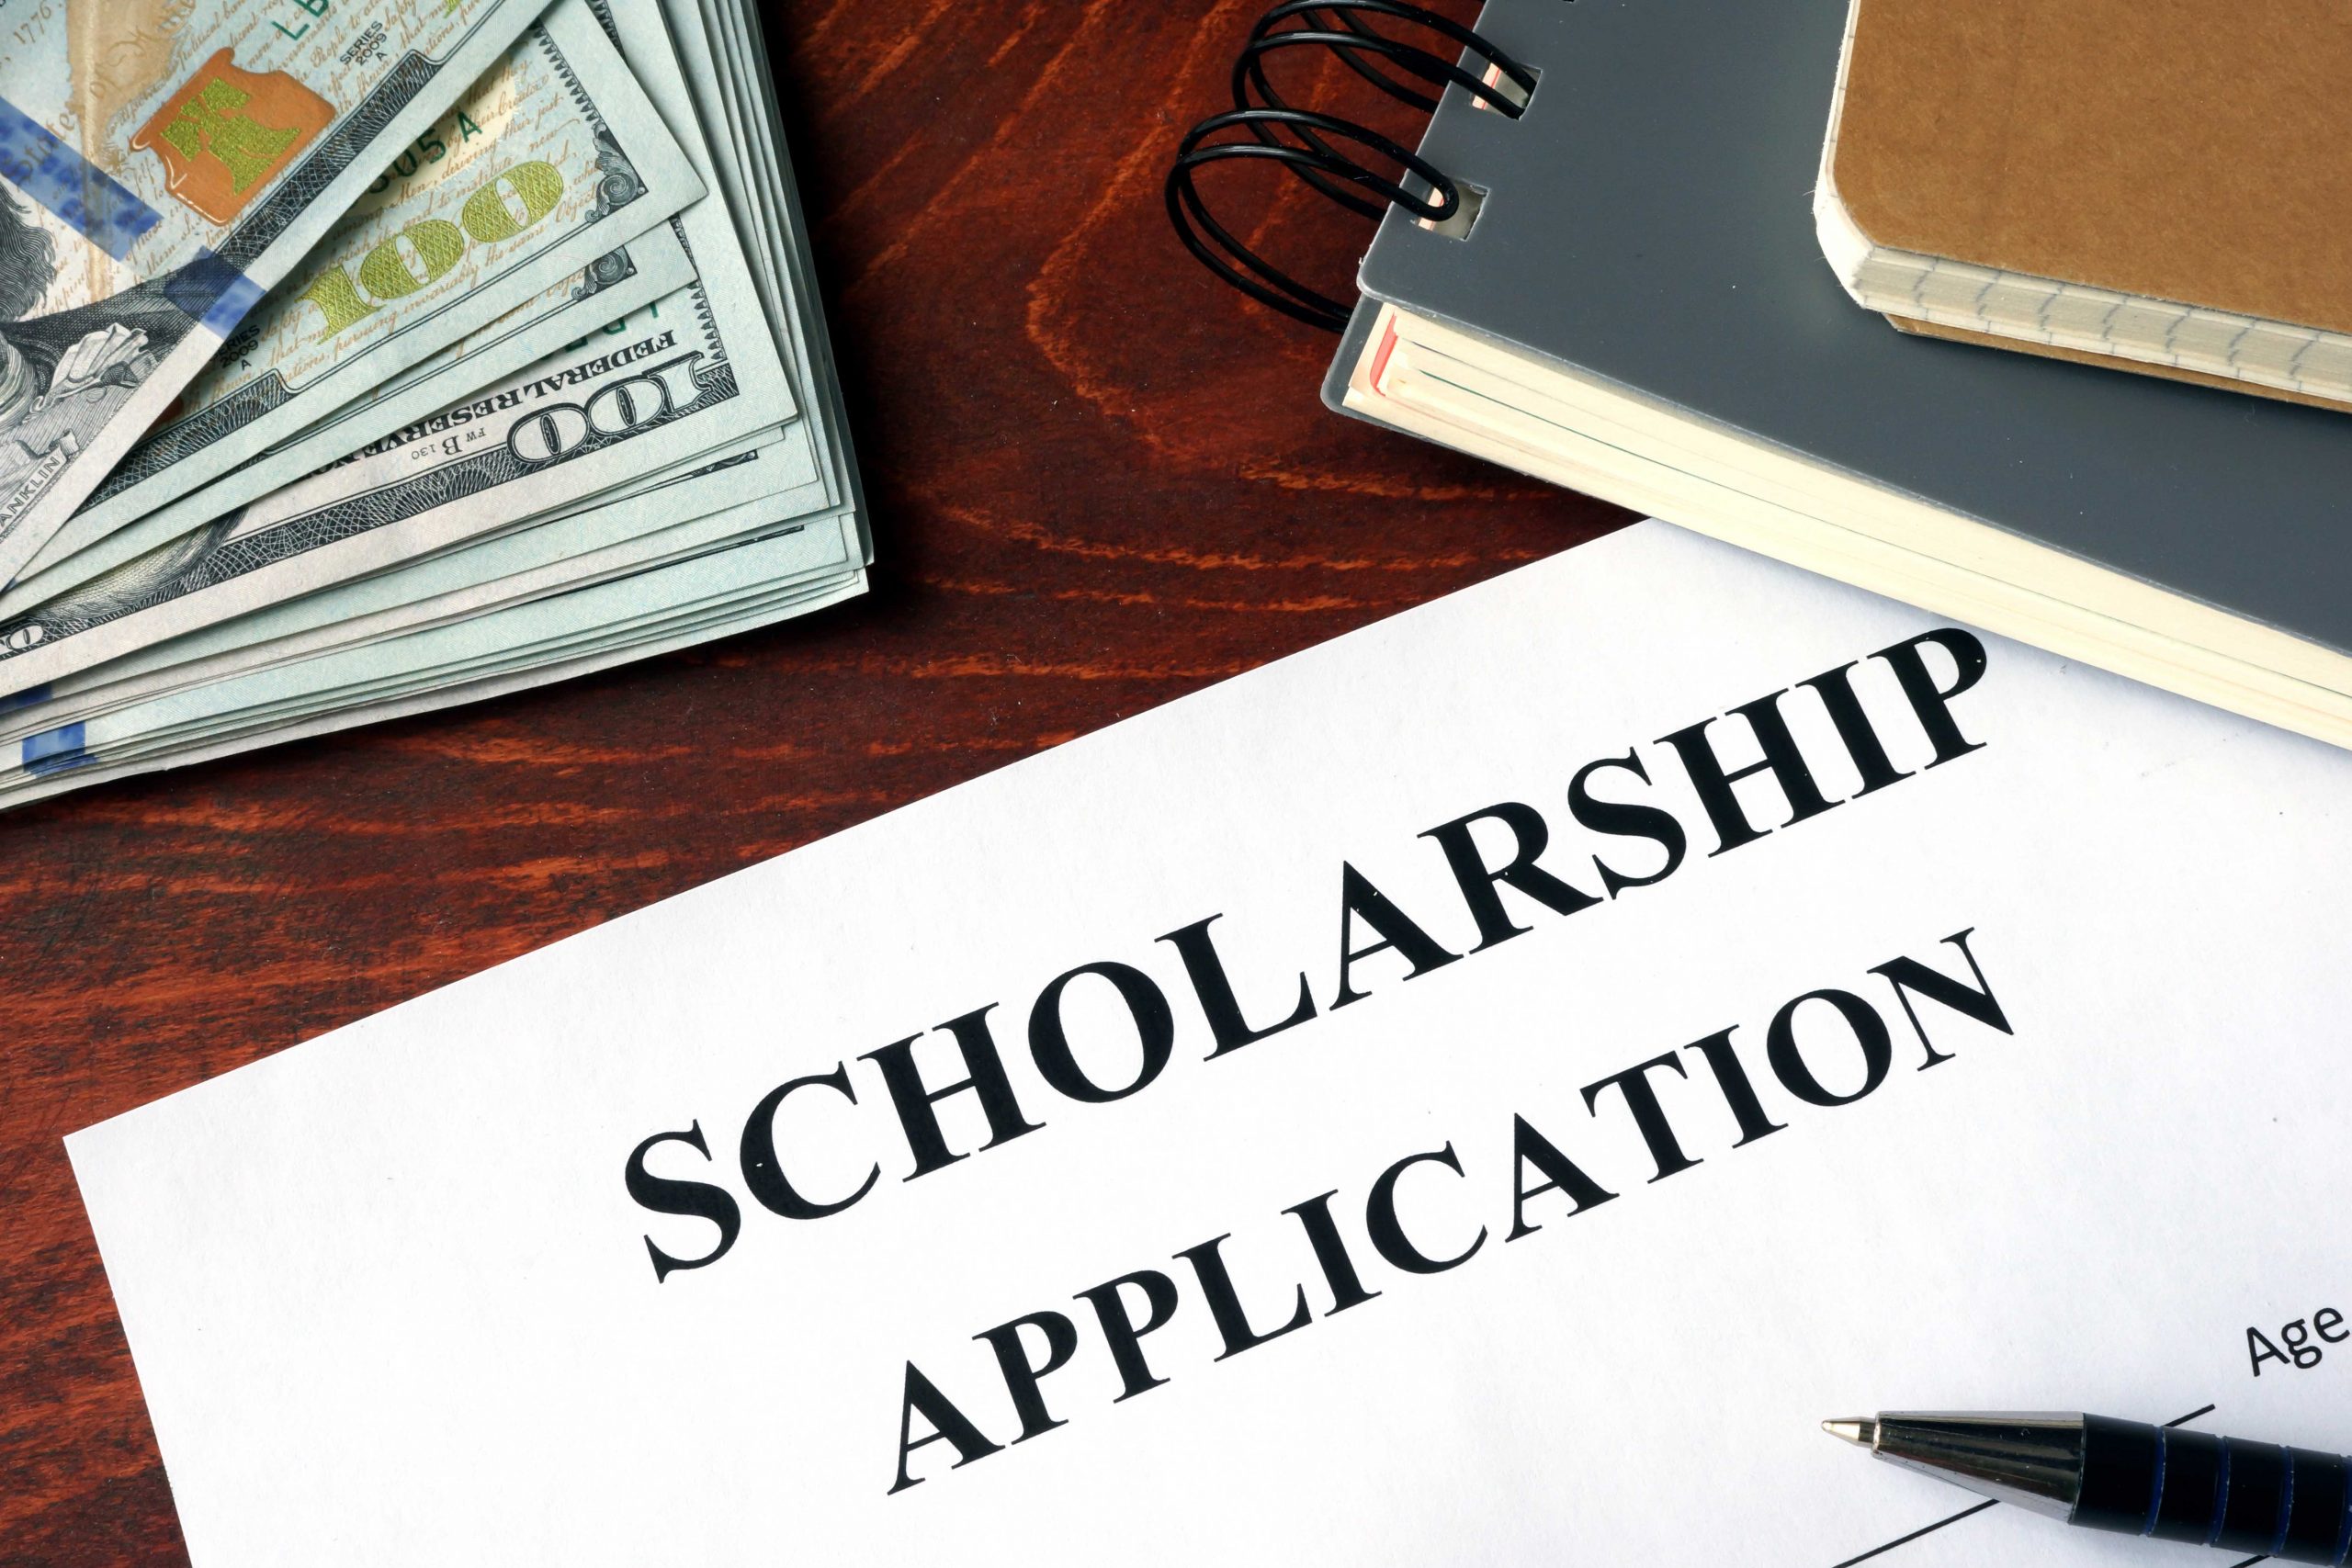 Scholarship Application on a table and dollars.